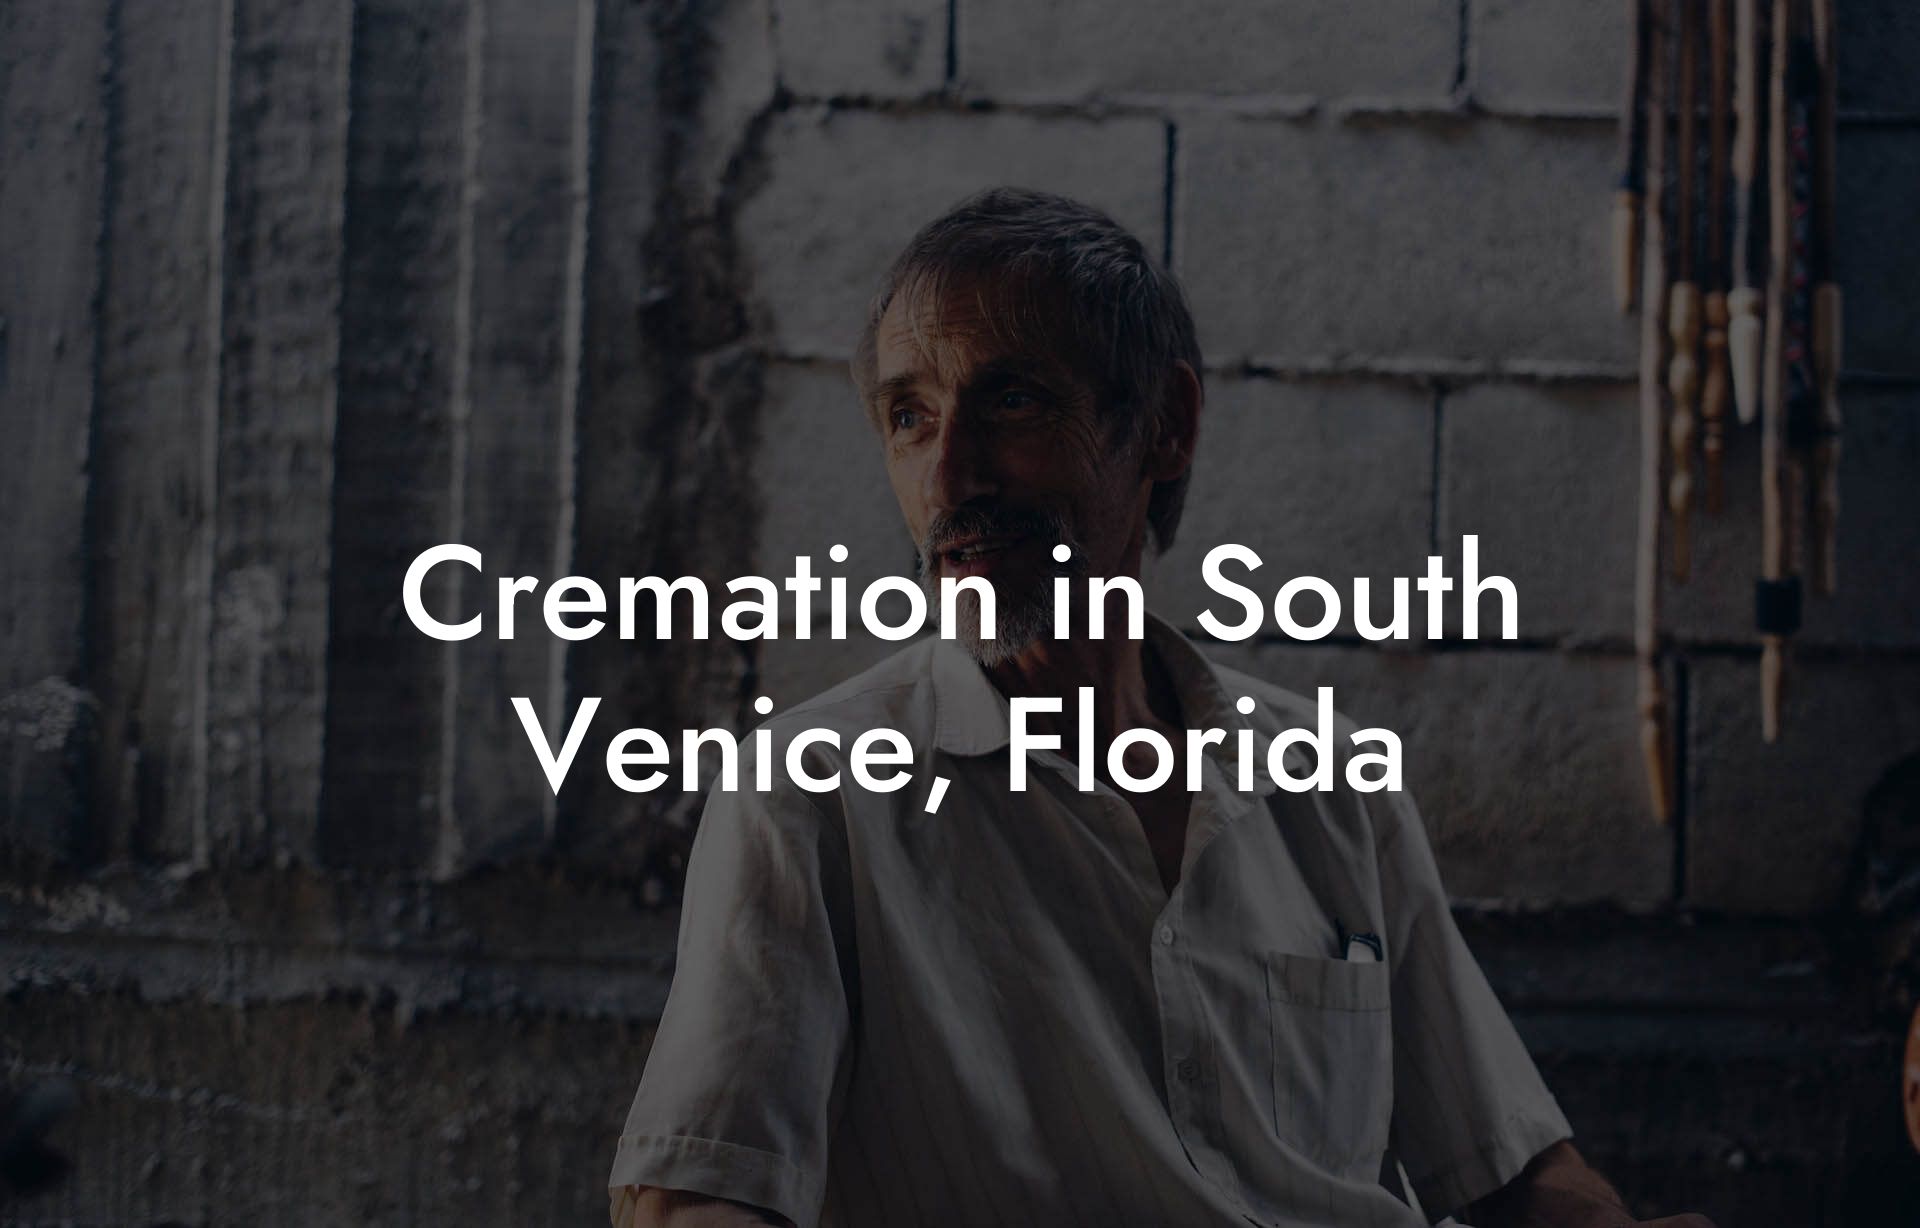 Cremation in South Venice, Florida